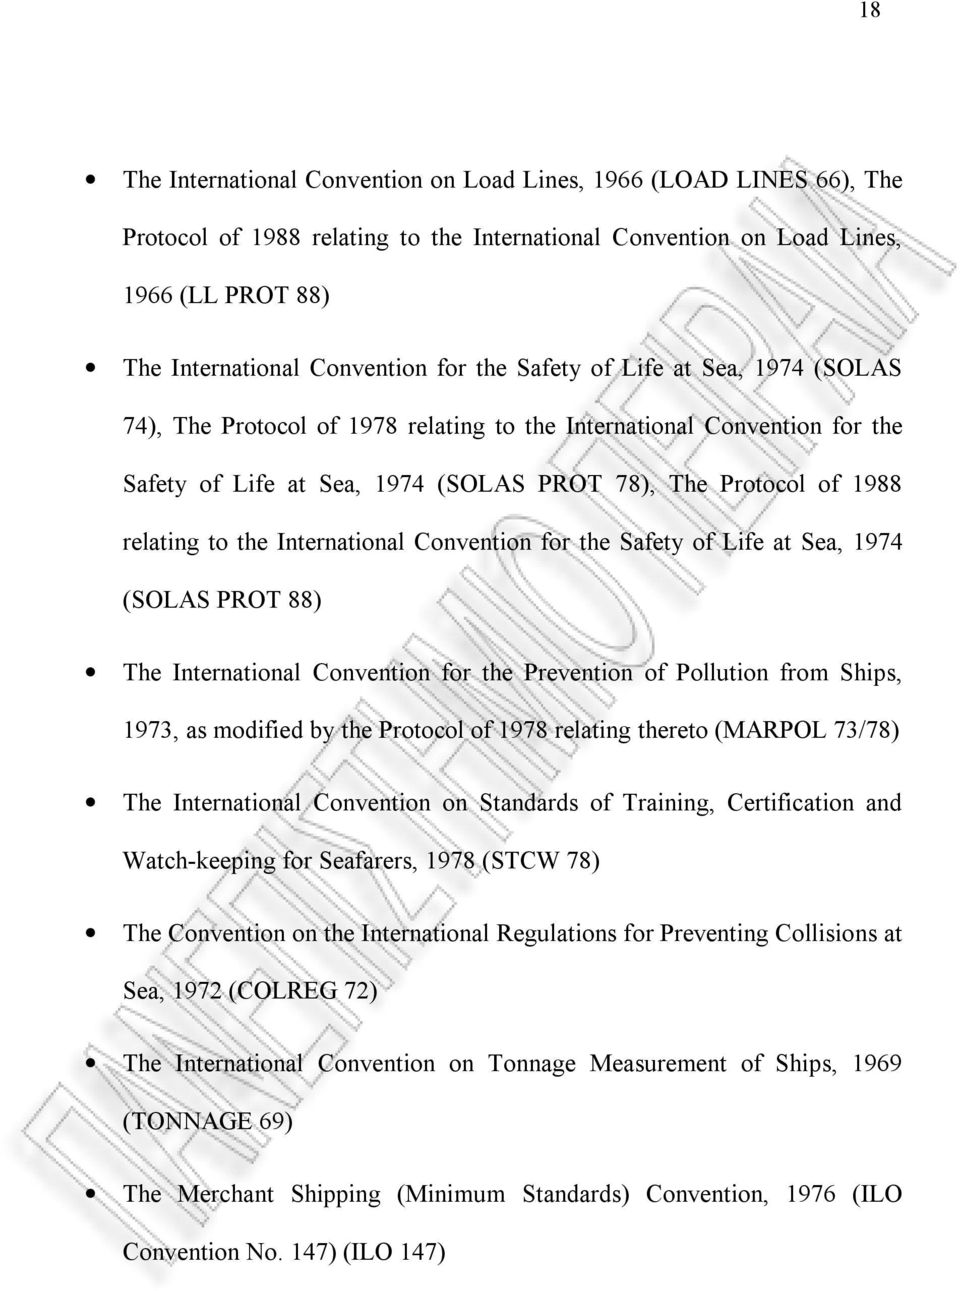 International Convention for the Safety of Life at Sea, 1974 (SOLAS PROT 88) The International Convention for the Prevention of Pollution from Ships, 1973, as modified by the Protocol of 1978